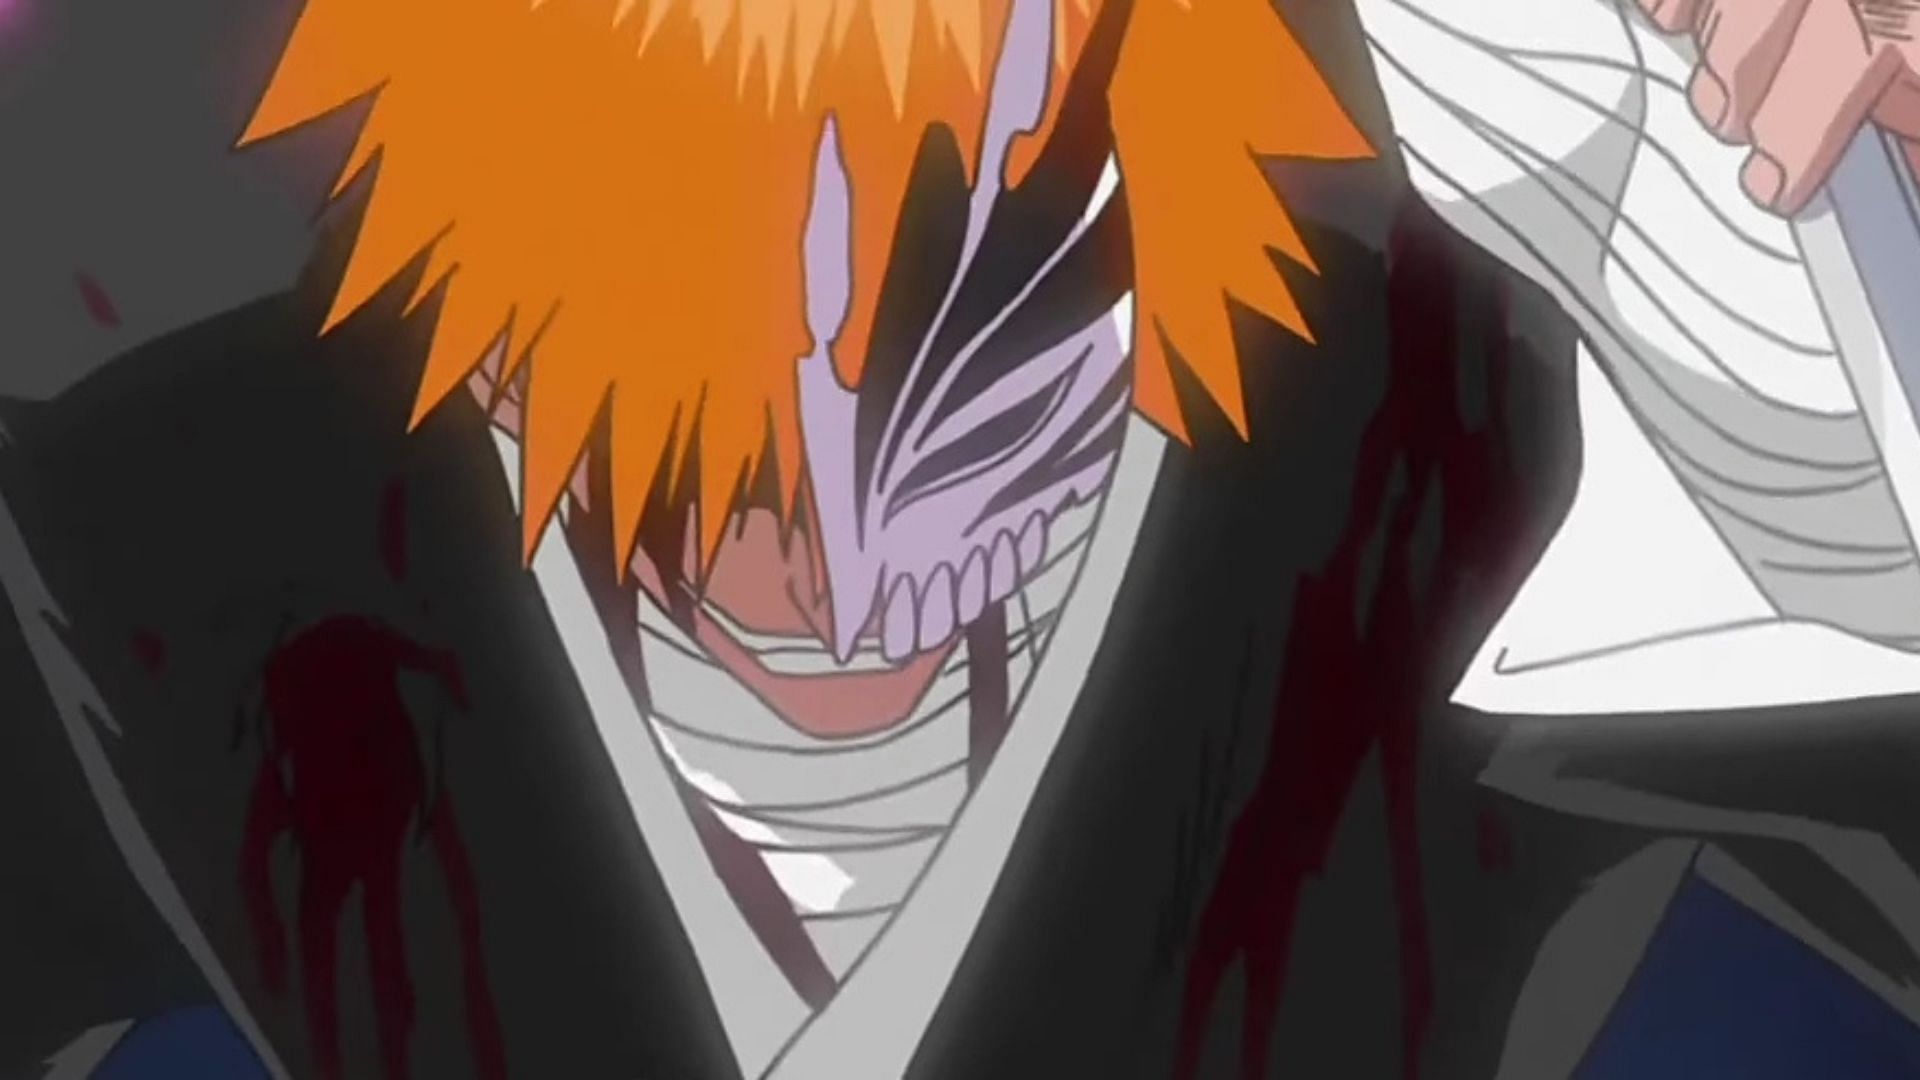 Ichigo in his hollow,soul reaper,quincy hybrid form  Bleach anime, Bleach  figures, Free anime characters